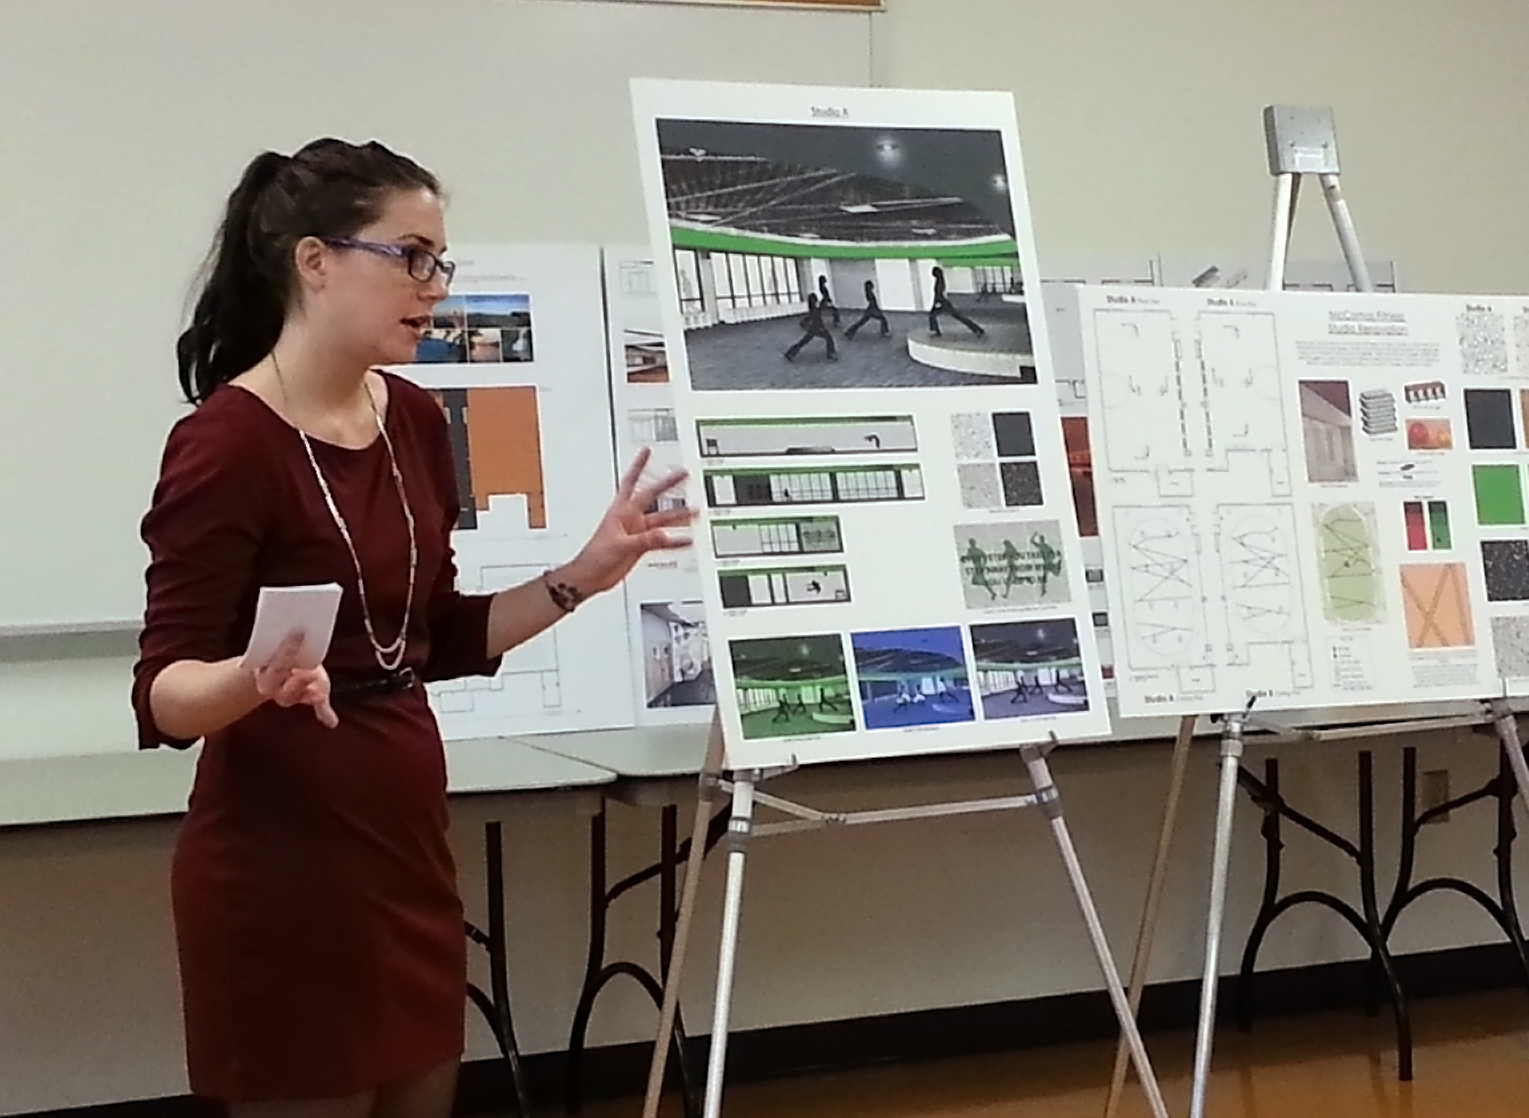 Young woman presents design boards for fitness studios.